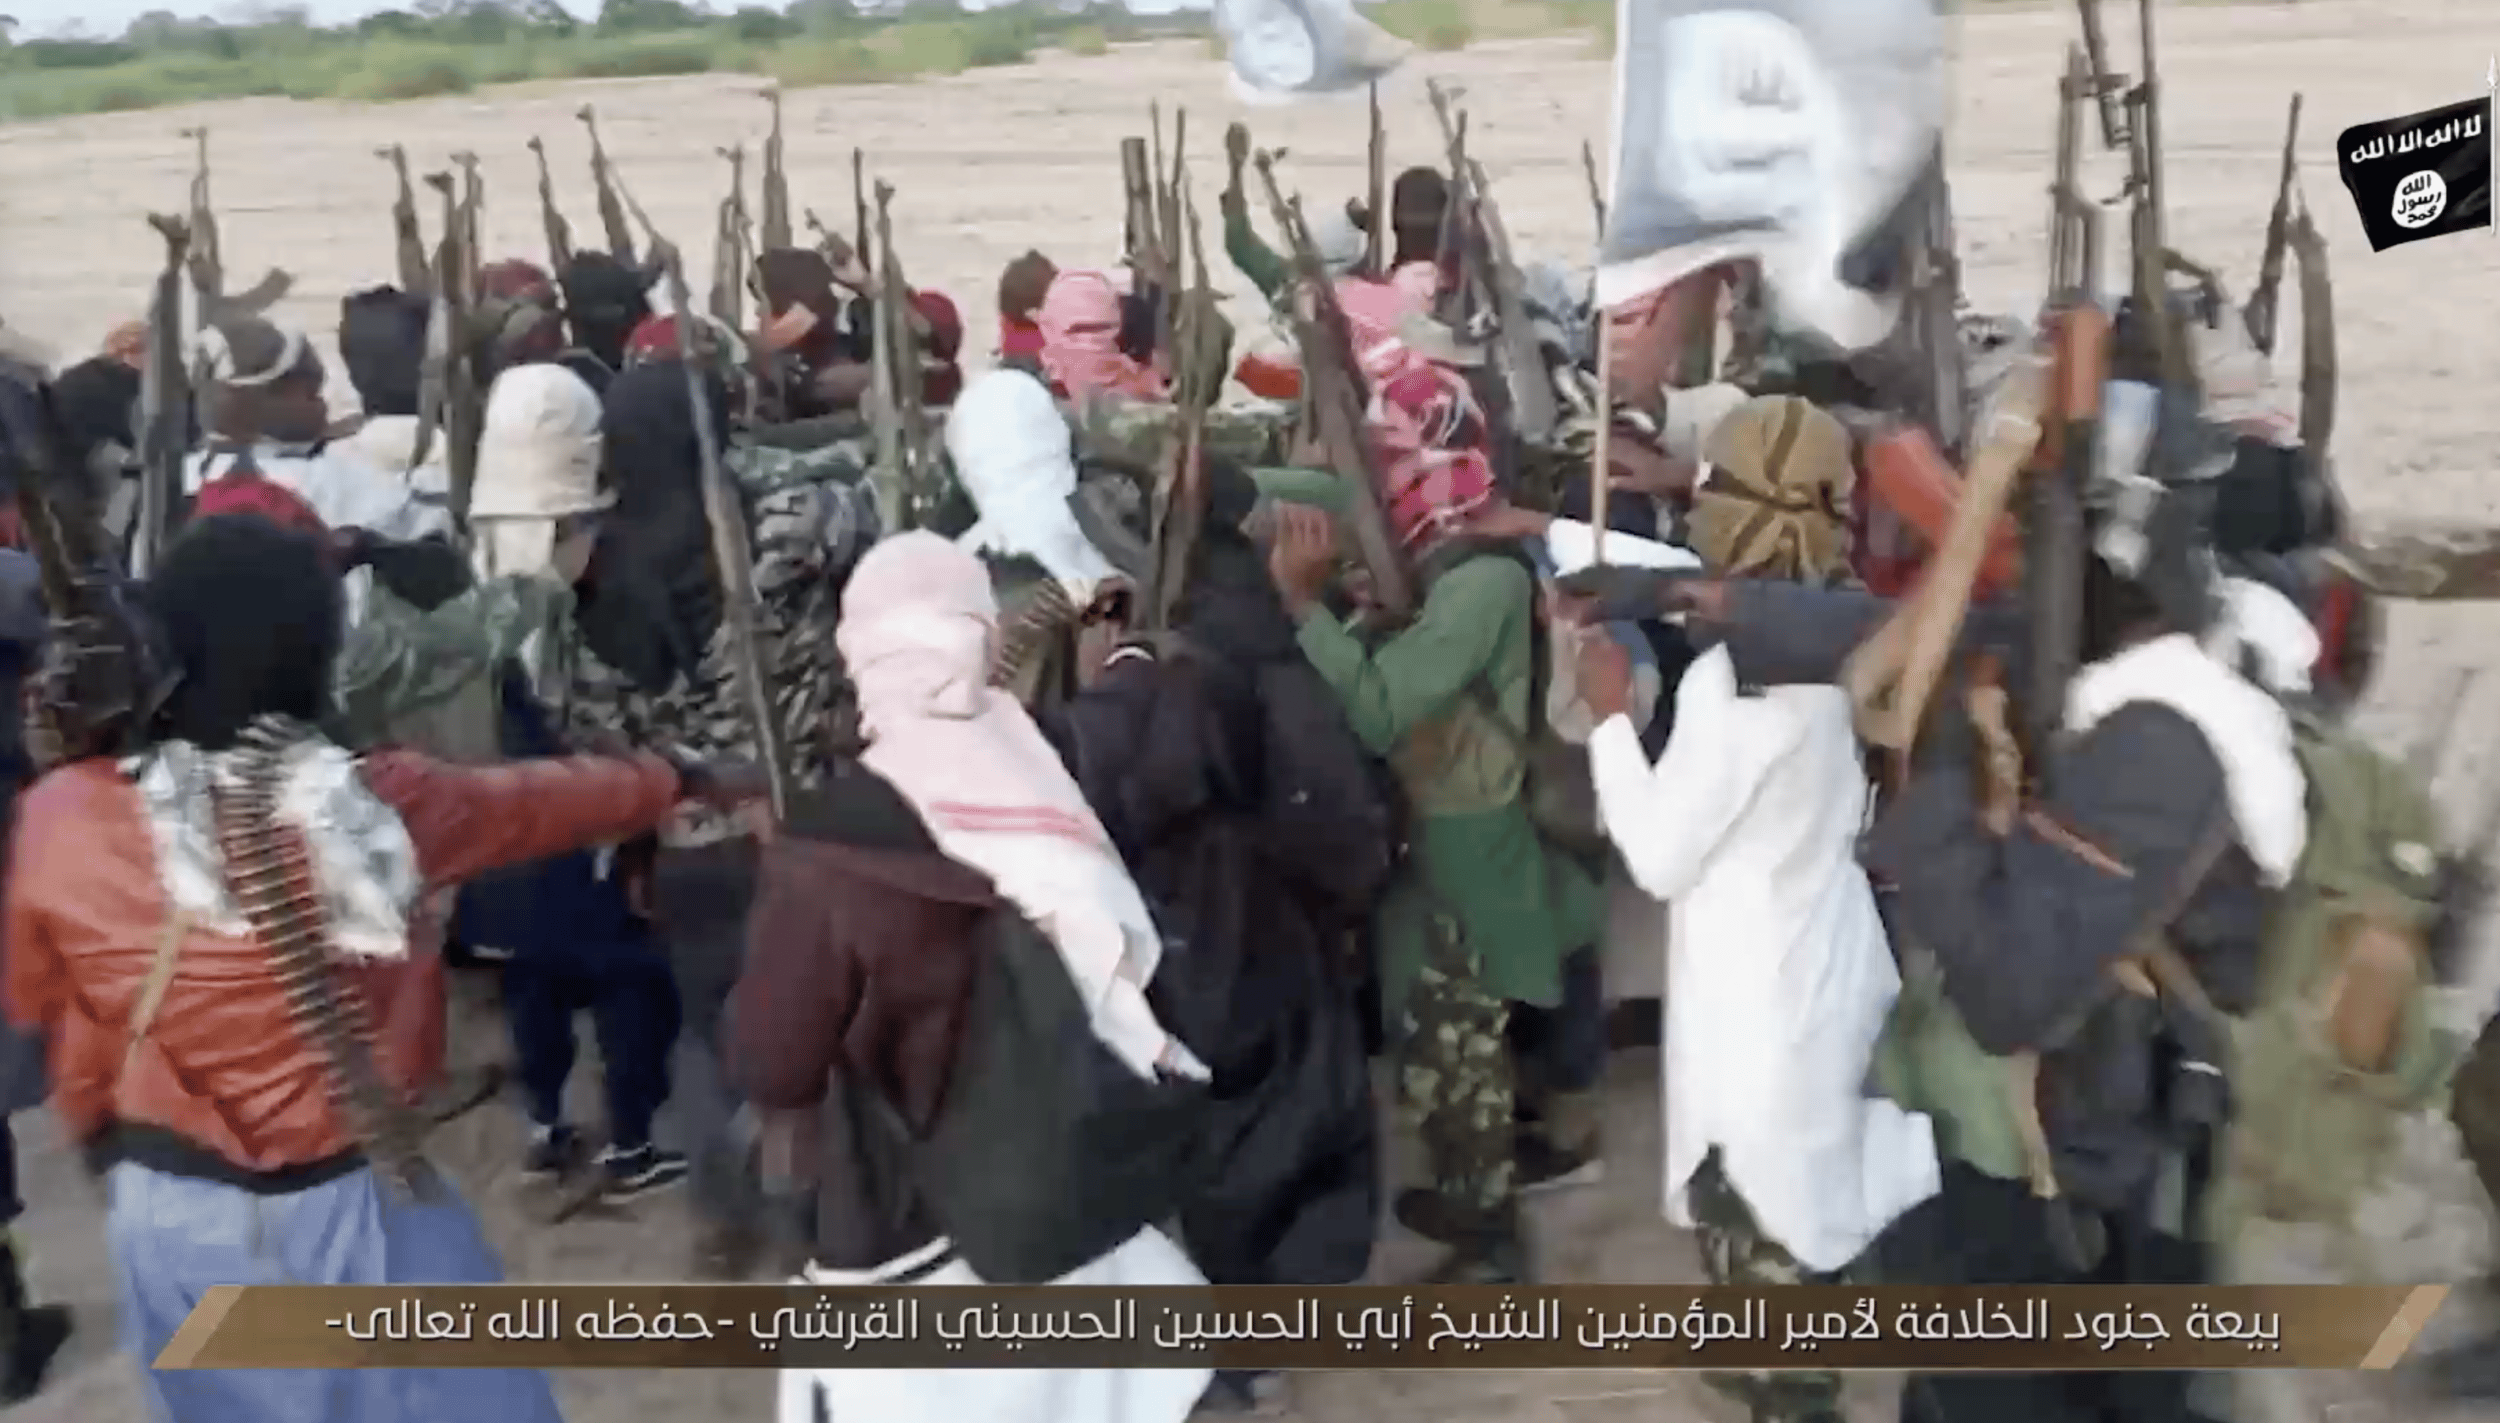 (Video) Islamic State (IS) Releases “Allah Will Support Those Who Support Him”, Wilayah Mozambique